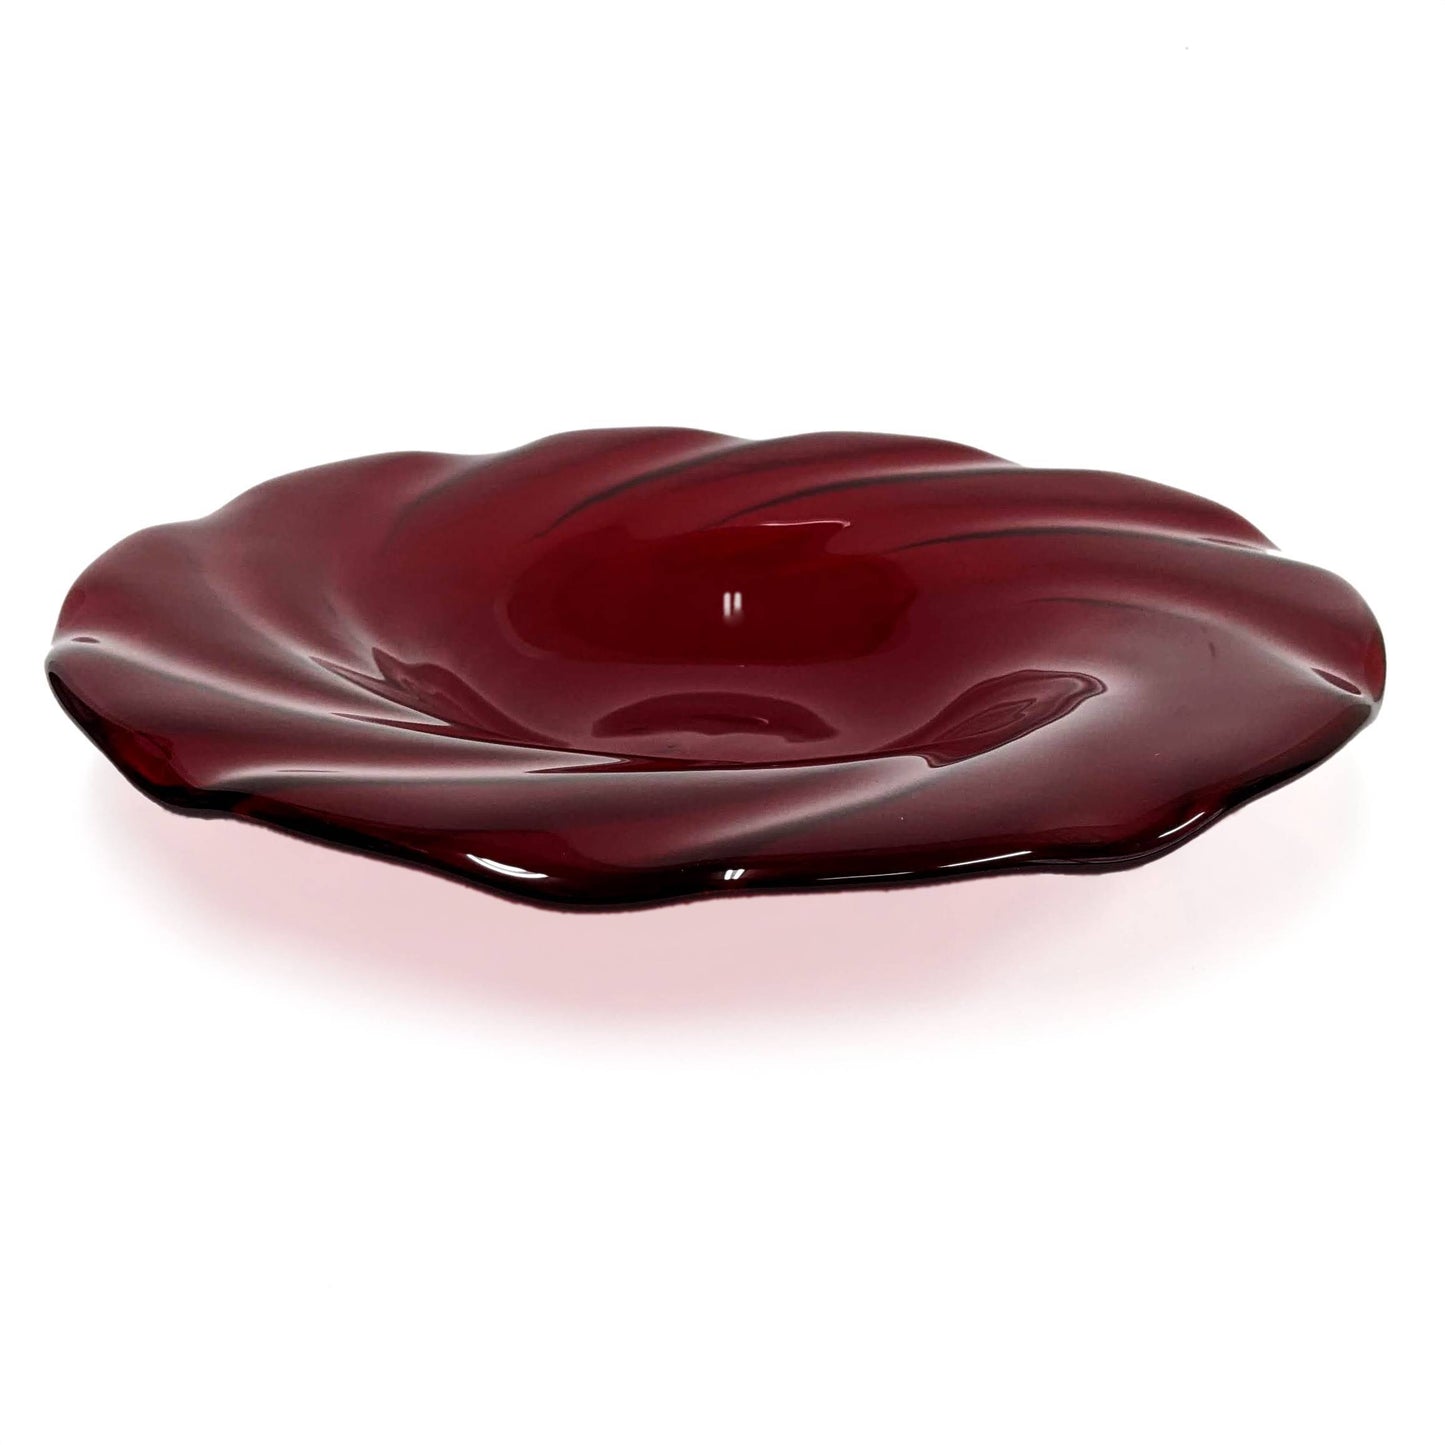 Ruby Red Decorative Glass Art Bowl | 40th Anniversary Gift Ideas